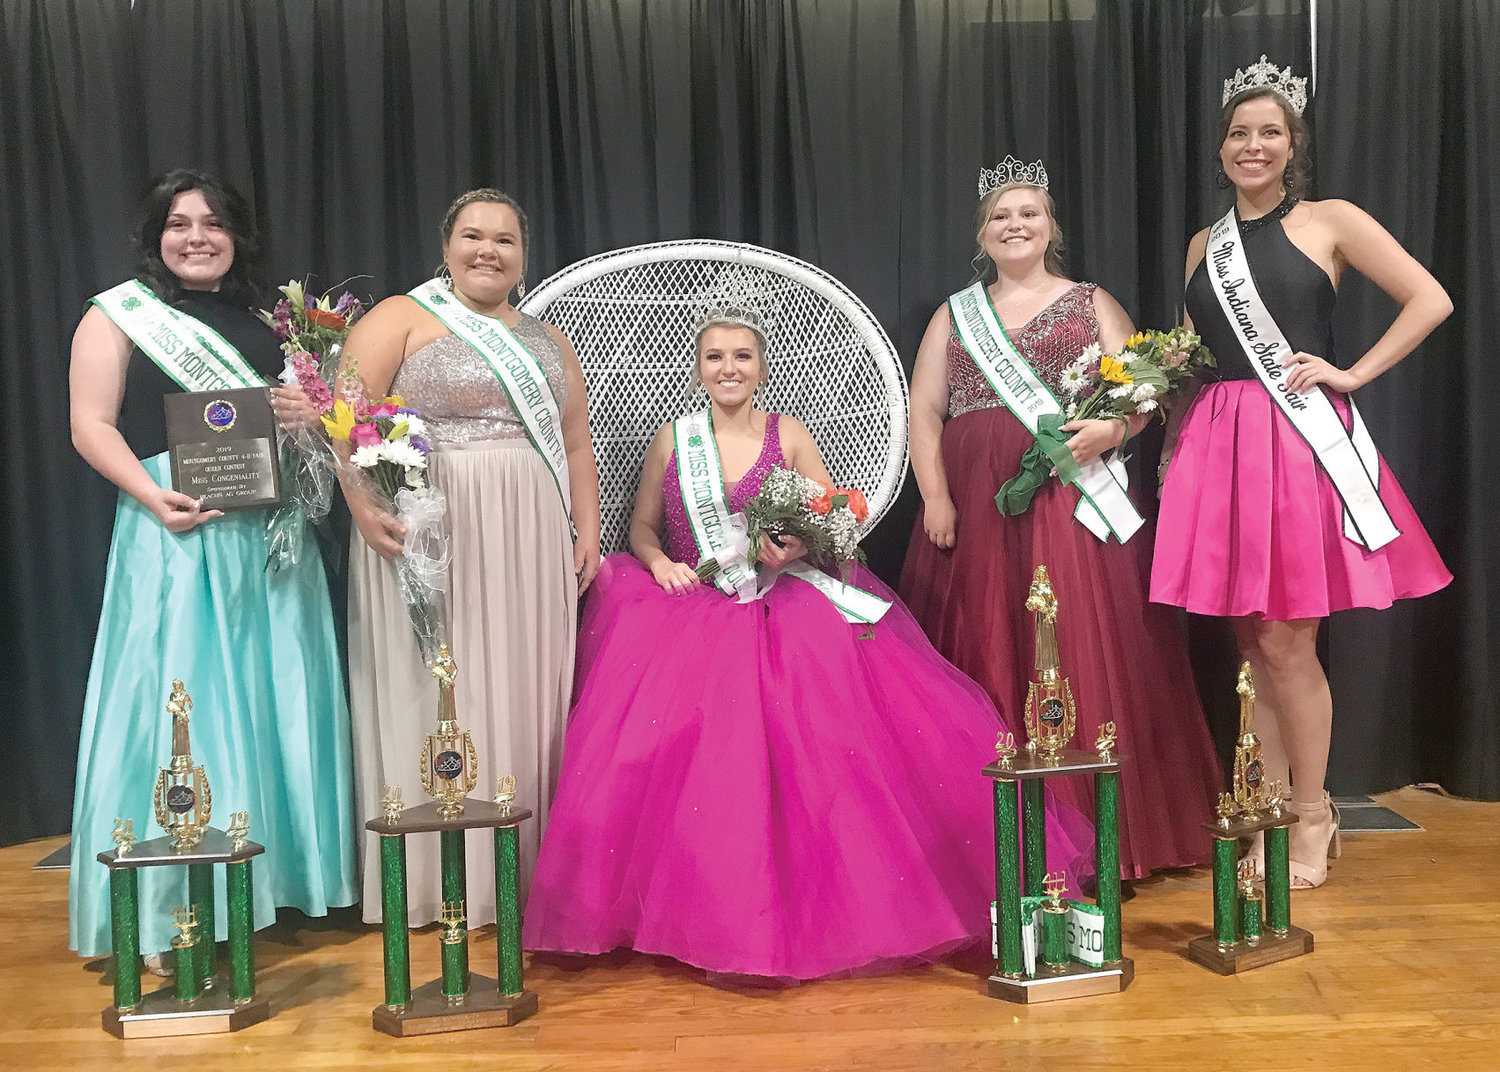 Jett McClaskey, seated, was named Miss Montgomery County 2019 on Saturday at the 4-H fairgrounds. She is pictured with, from left, Aubry Patton, Miss Congeniality and second runner-up; Abbigayle Benge, first runner-up; Shyana Busse, Miss Montgomery County Princess and recipient of the Elaine Chambers Mental Attitude Award; and special guest Halle Shoults, Miss Indiana State Fair Queen 2019.